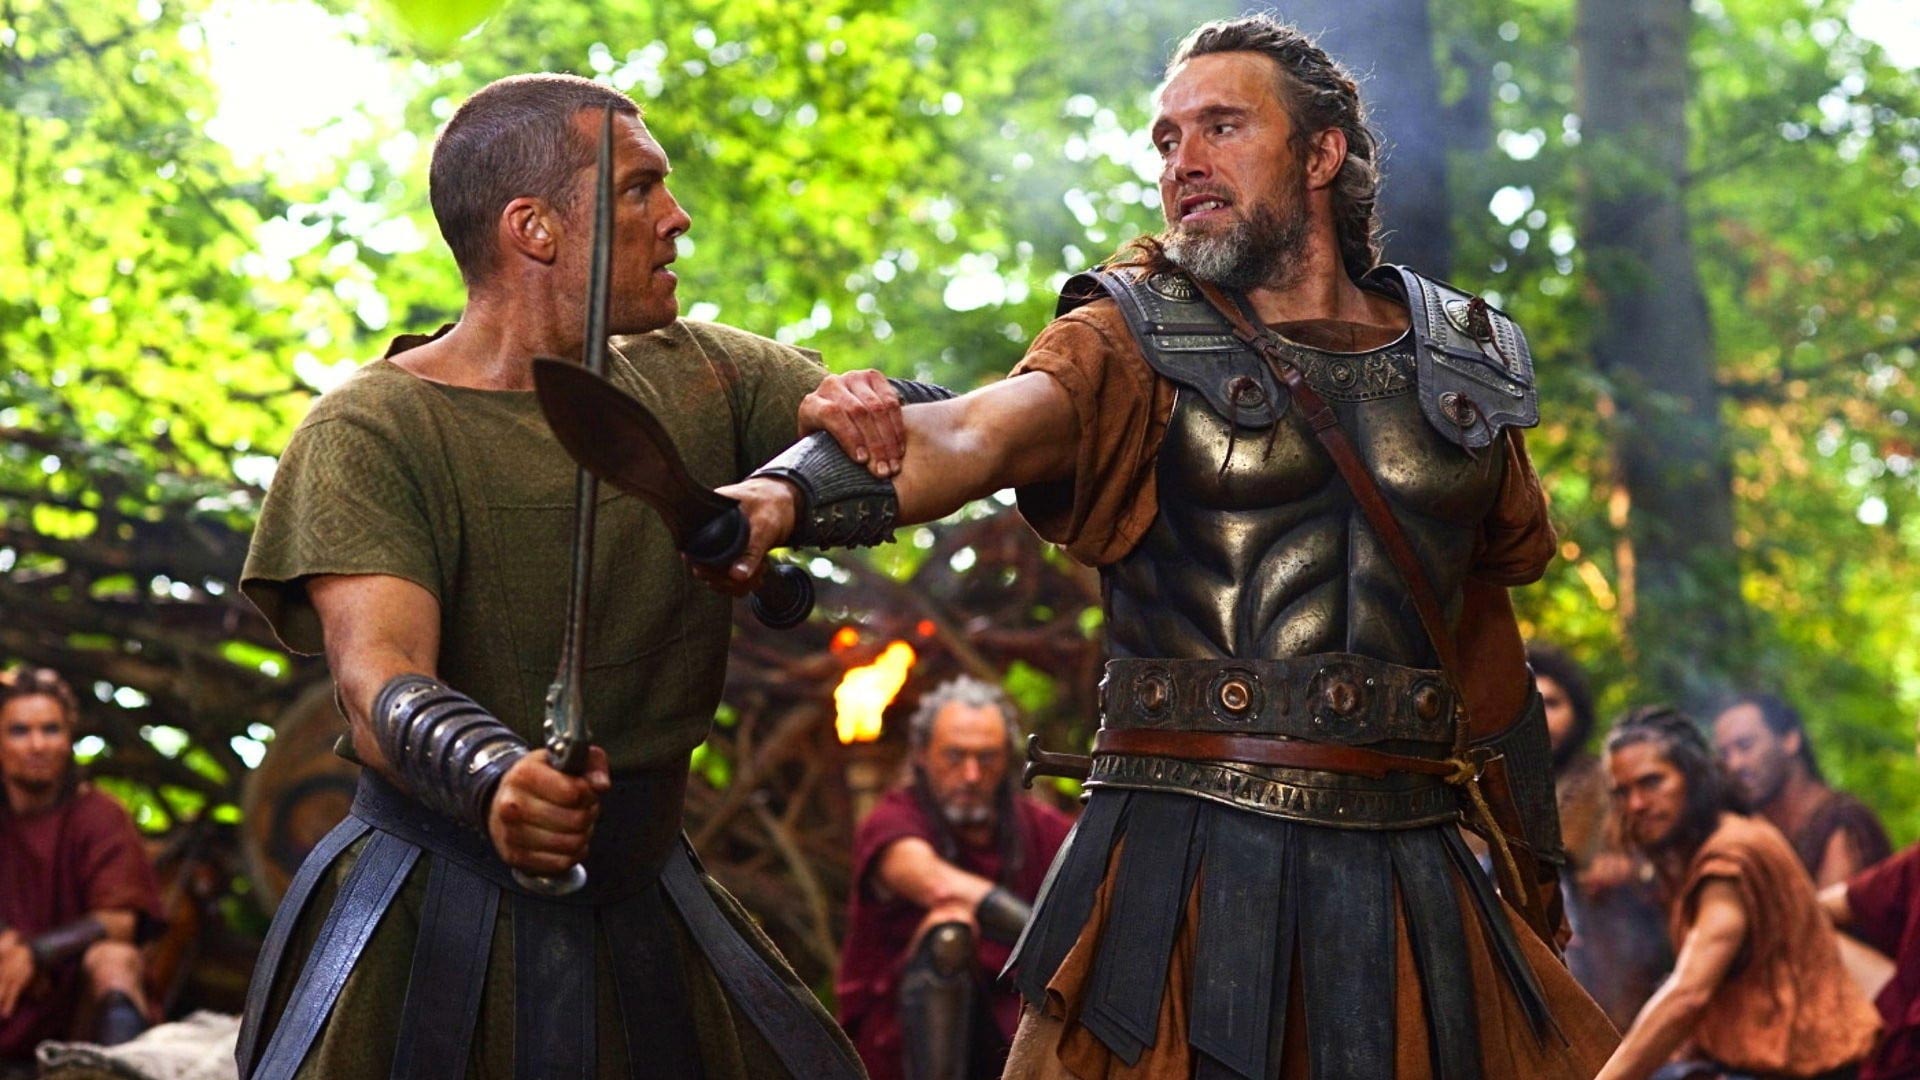 Clash Of The Titans movie review - MikeyMo